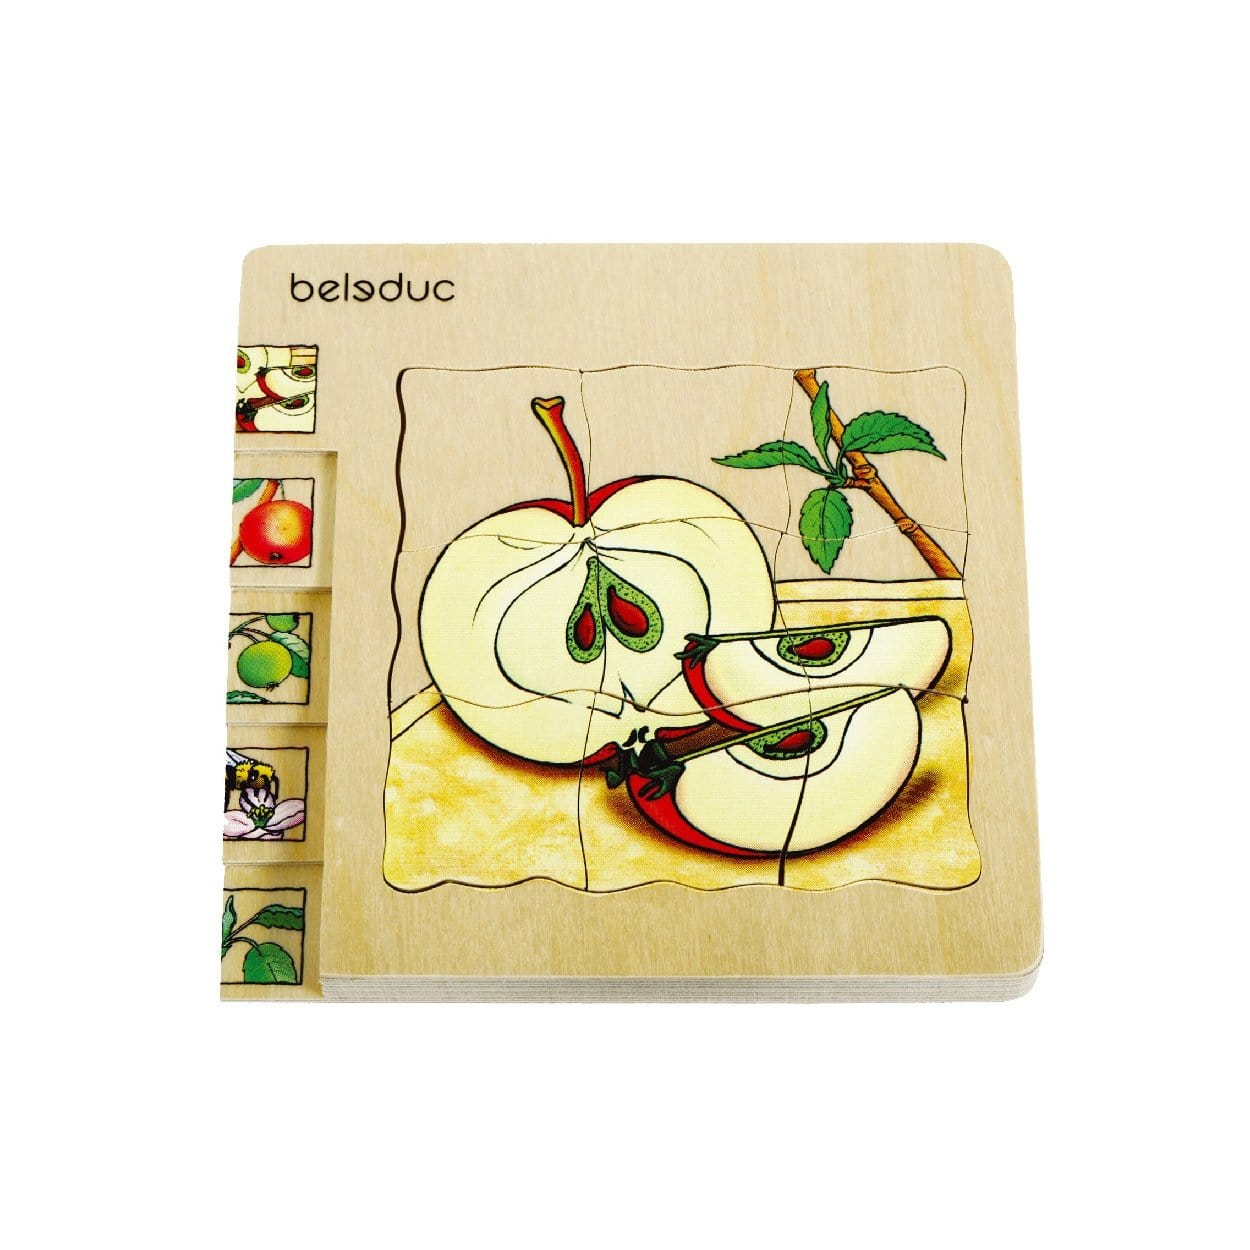 Beleduc Layer Puzzle - Lifecycle of an Apple - The Montessori Room Build vocabulary and language skills by identifying and naming parts of the plant and apple, while learning about the growth process of fruits. Features 5 puzzles in 1, each layered on the next., Toronto, Ontario, Canada